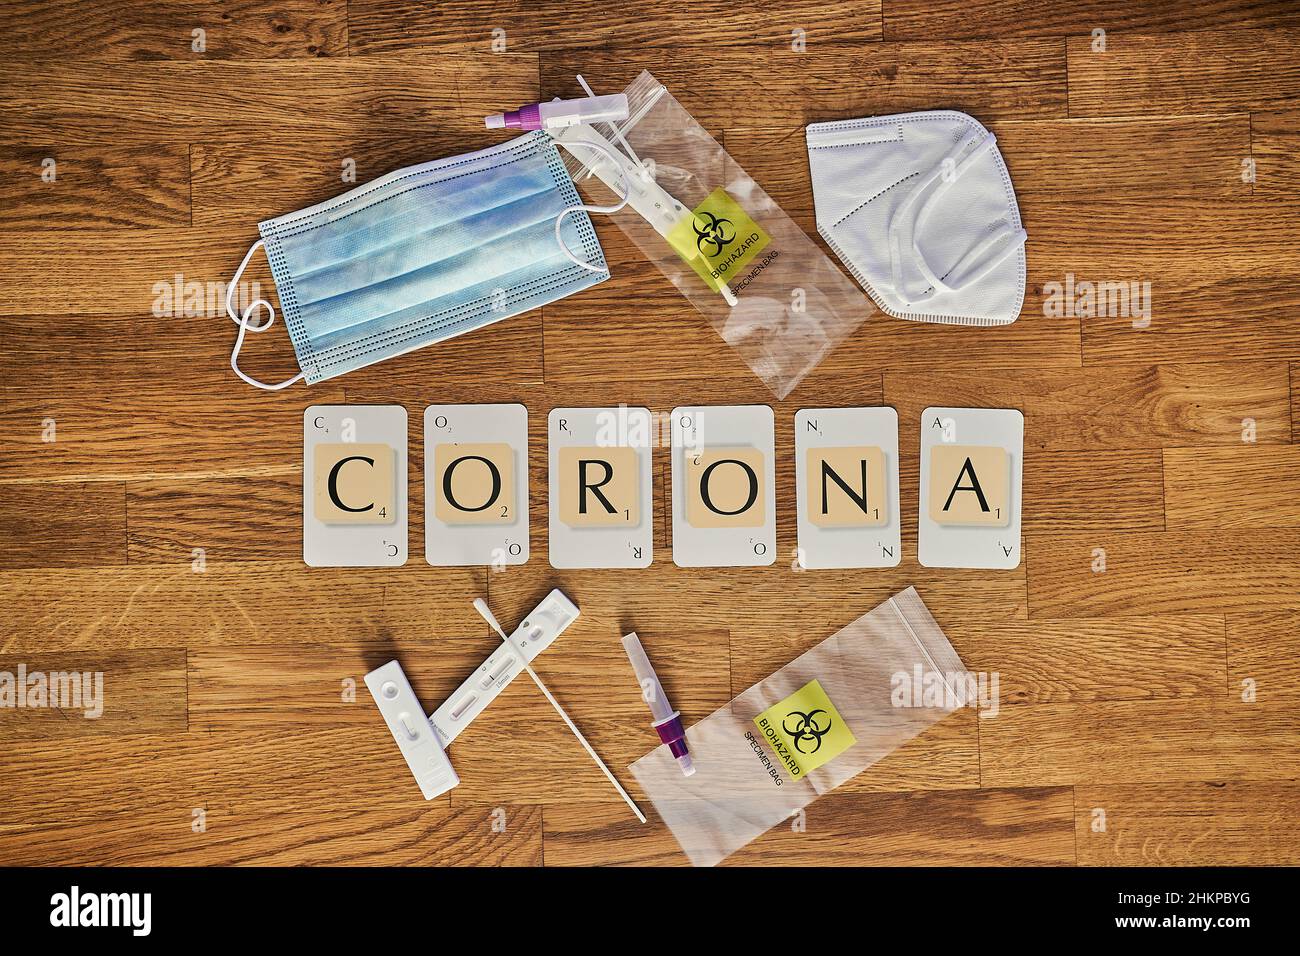 Scrabble letter cards spelling the corona covid 19 Pandemic related word Corona Stock Photo